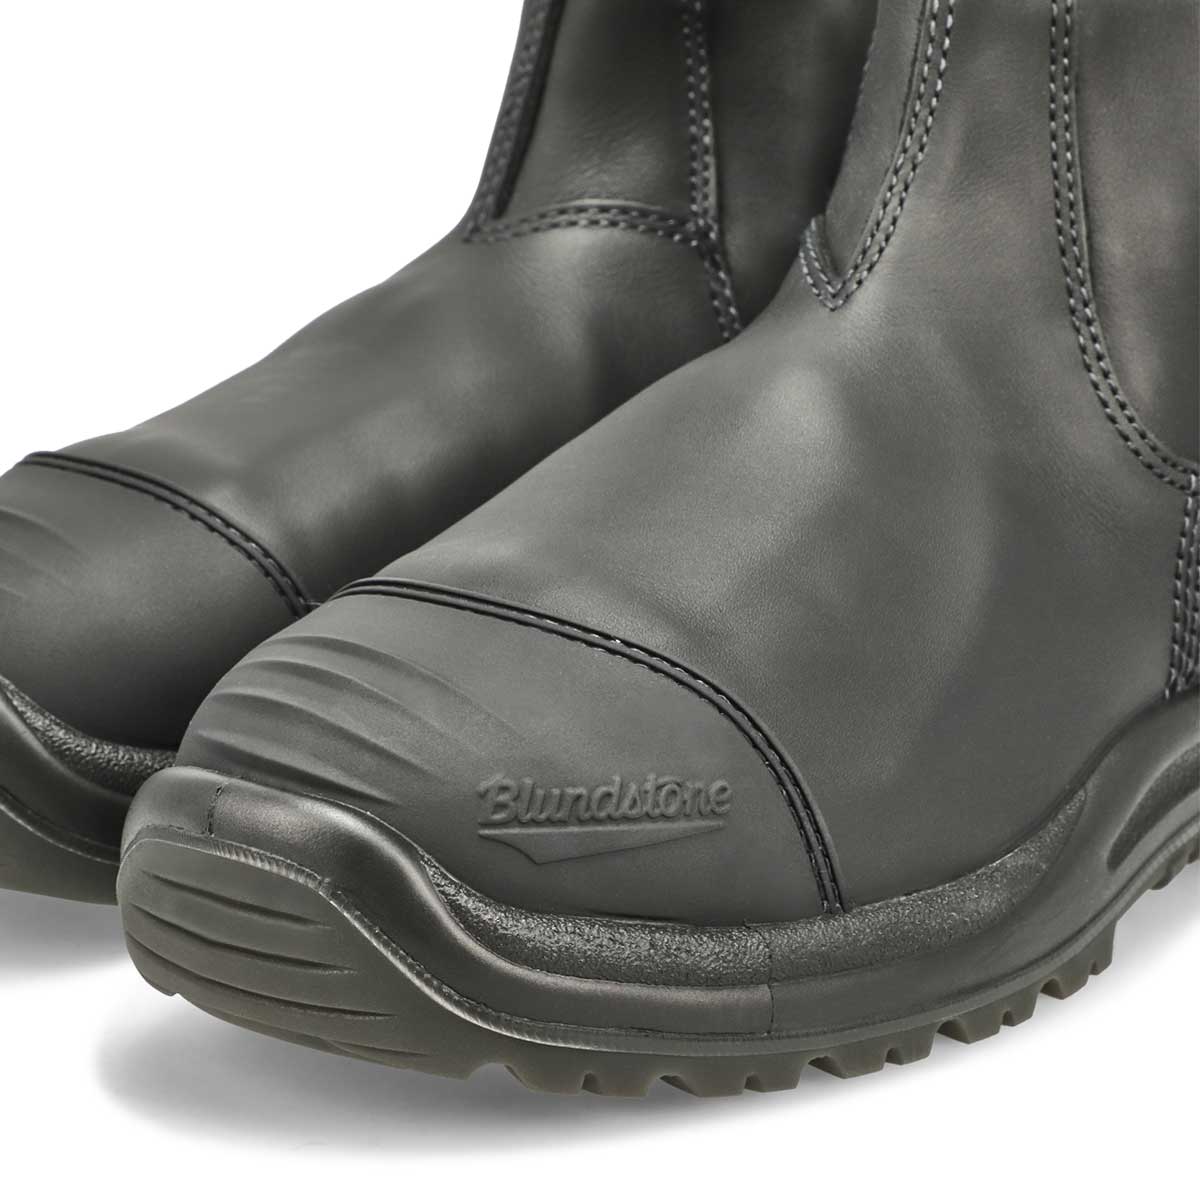 blundstone 165 review